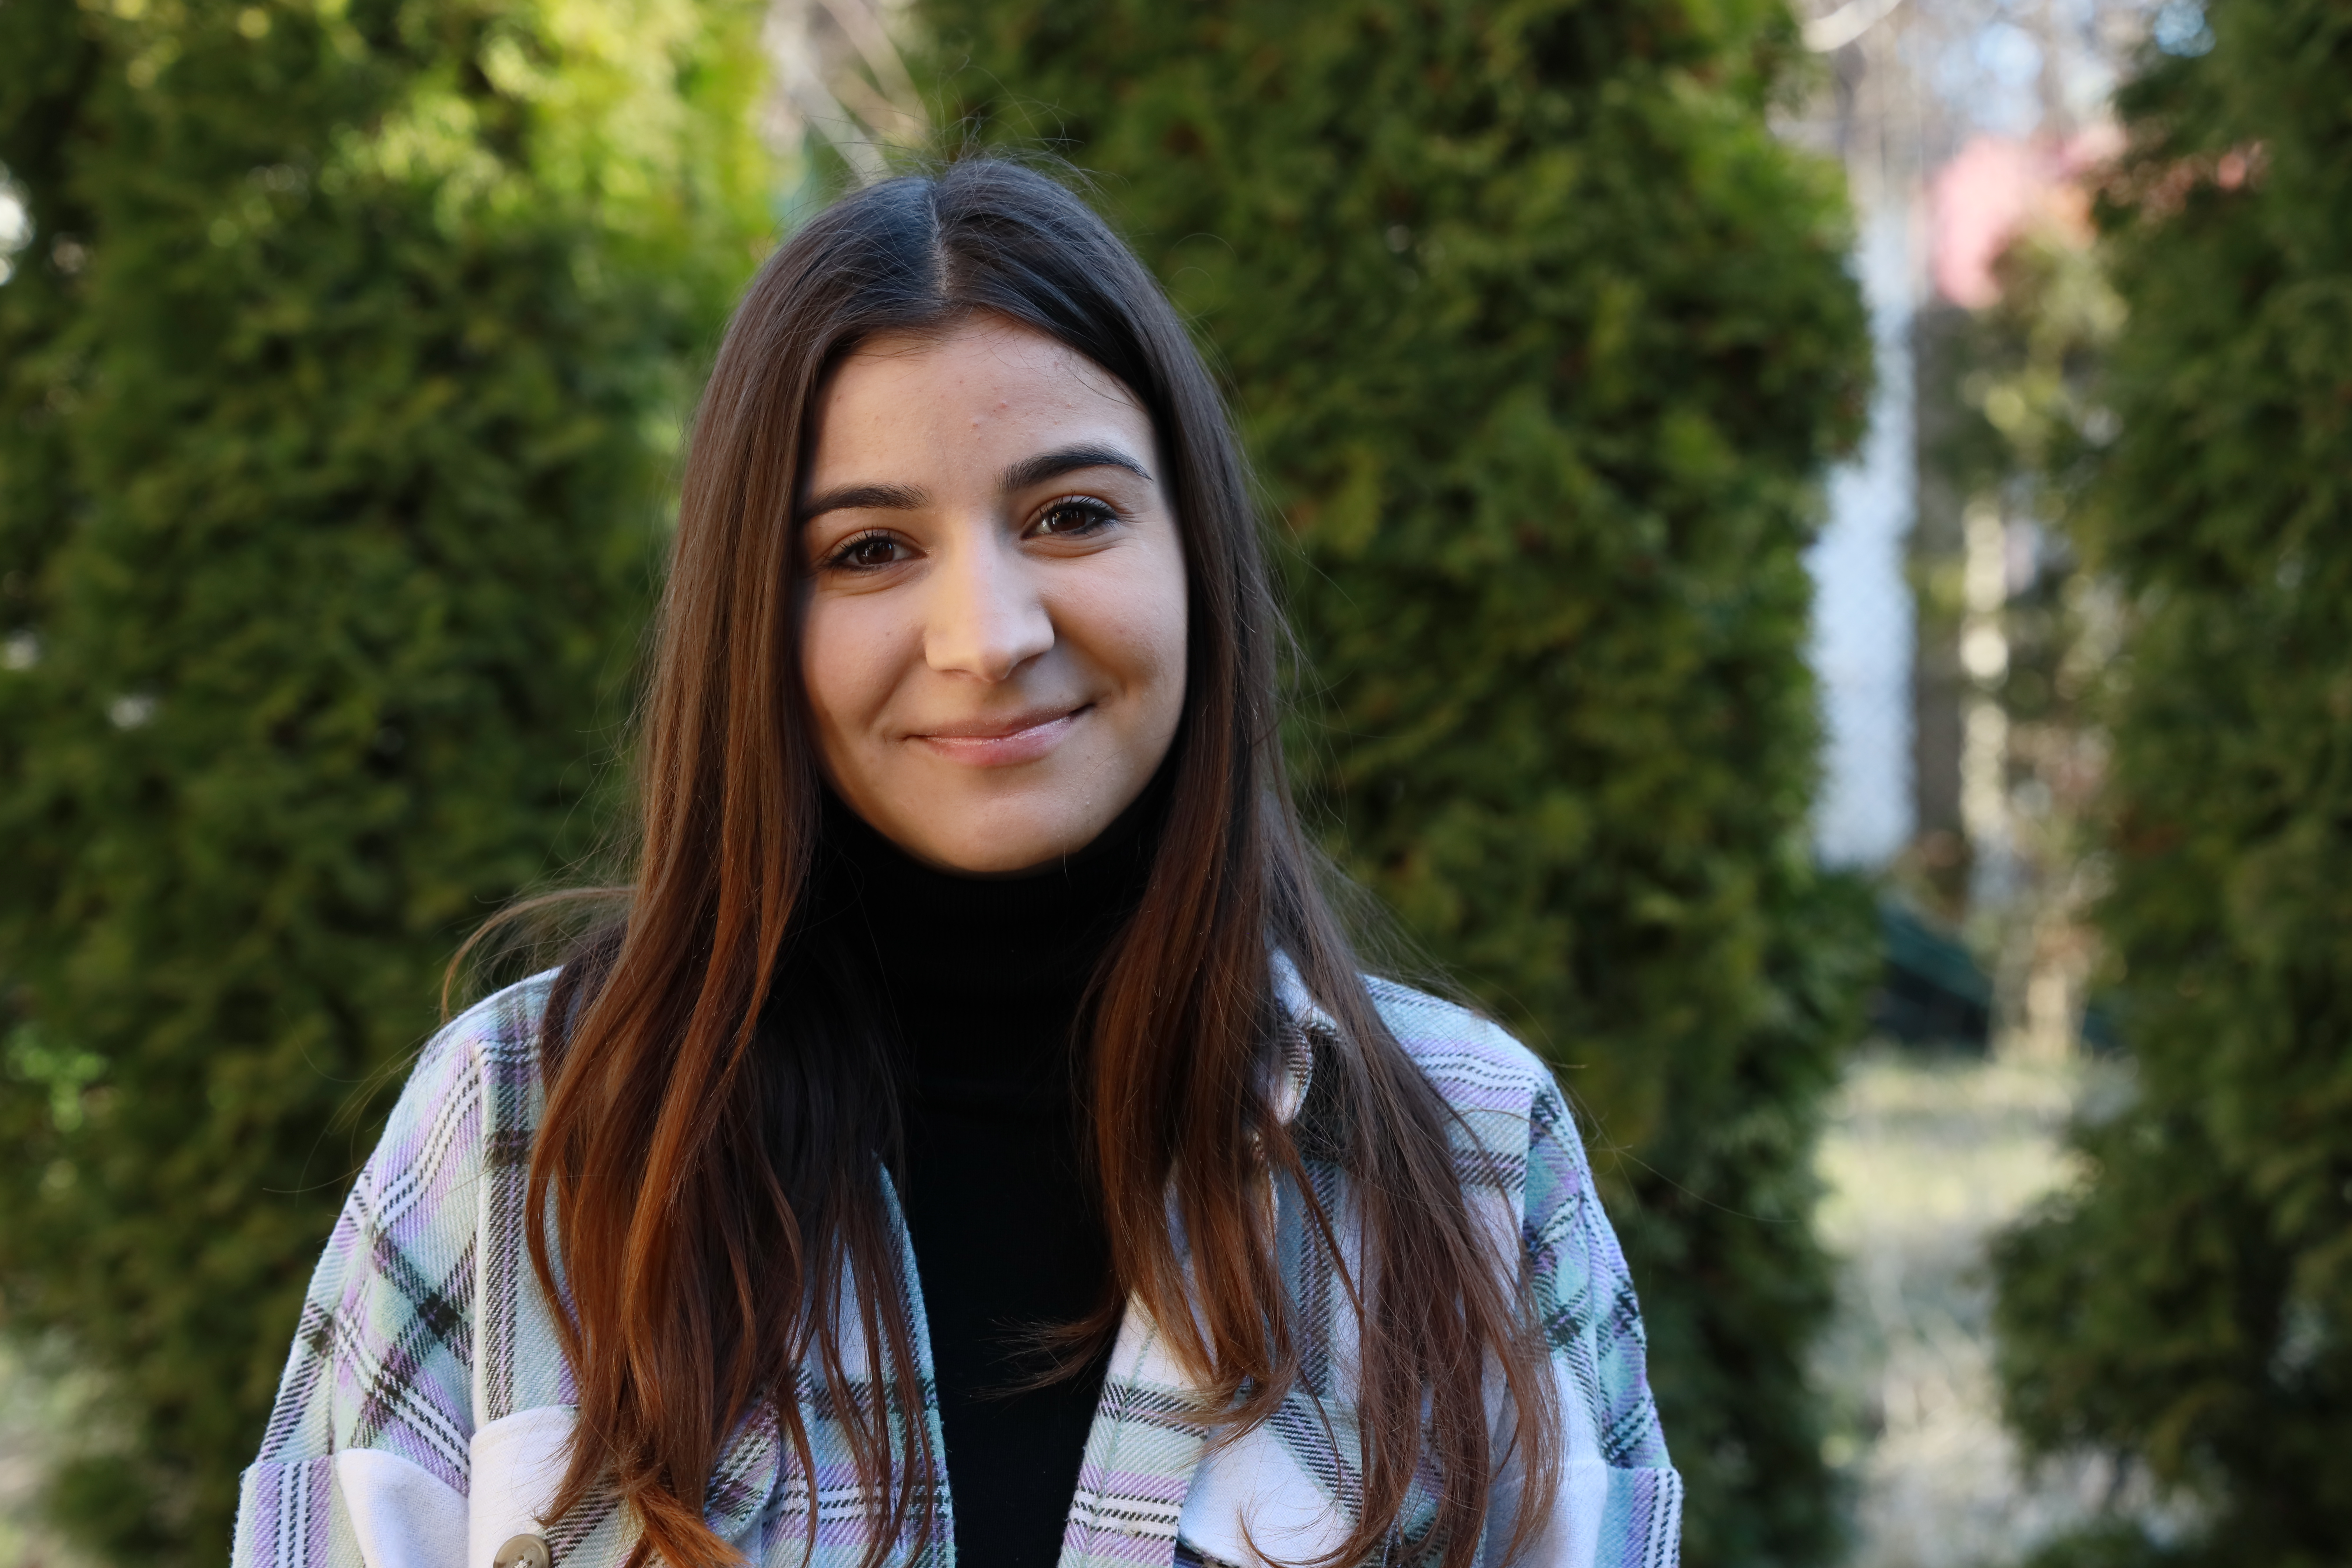 A 21-year old girl from Romania smiling and looking directly into the camera in a park